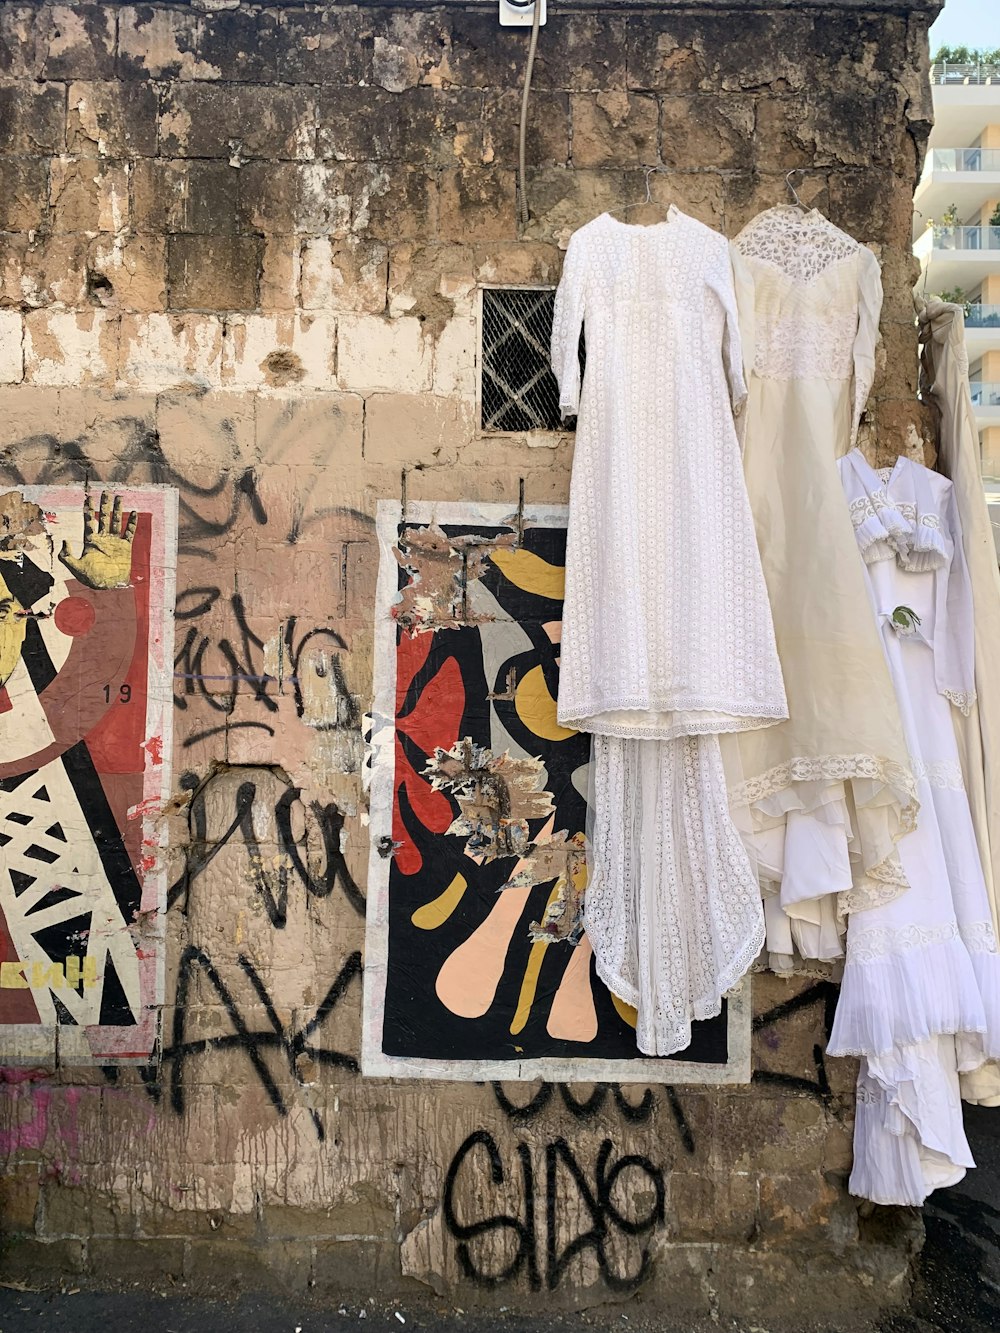 clothes hanging on a wall with graffiti on it